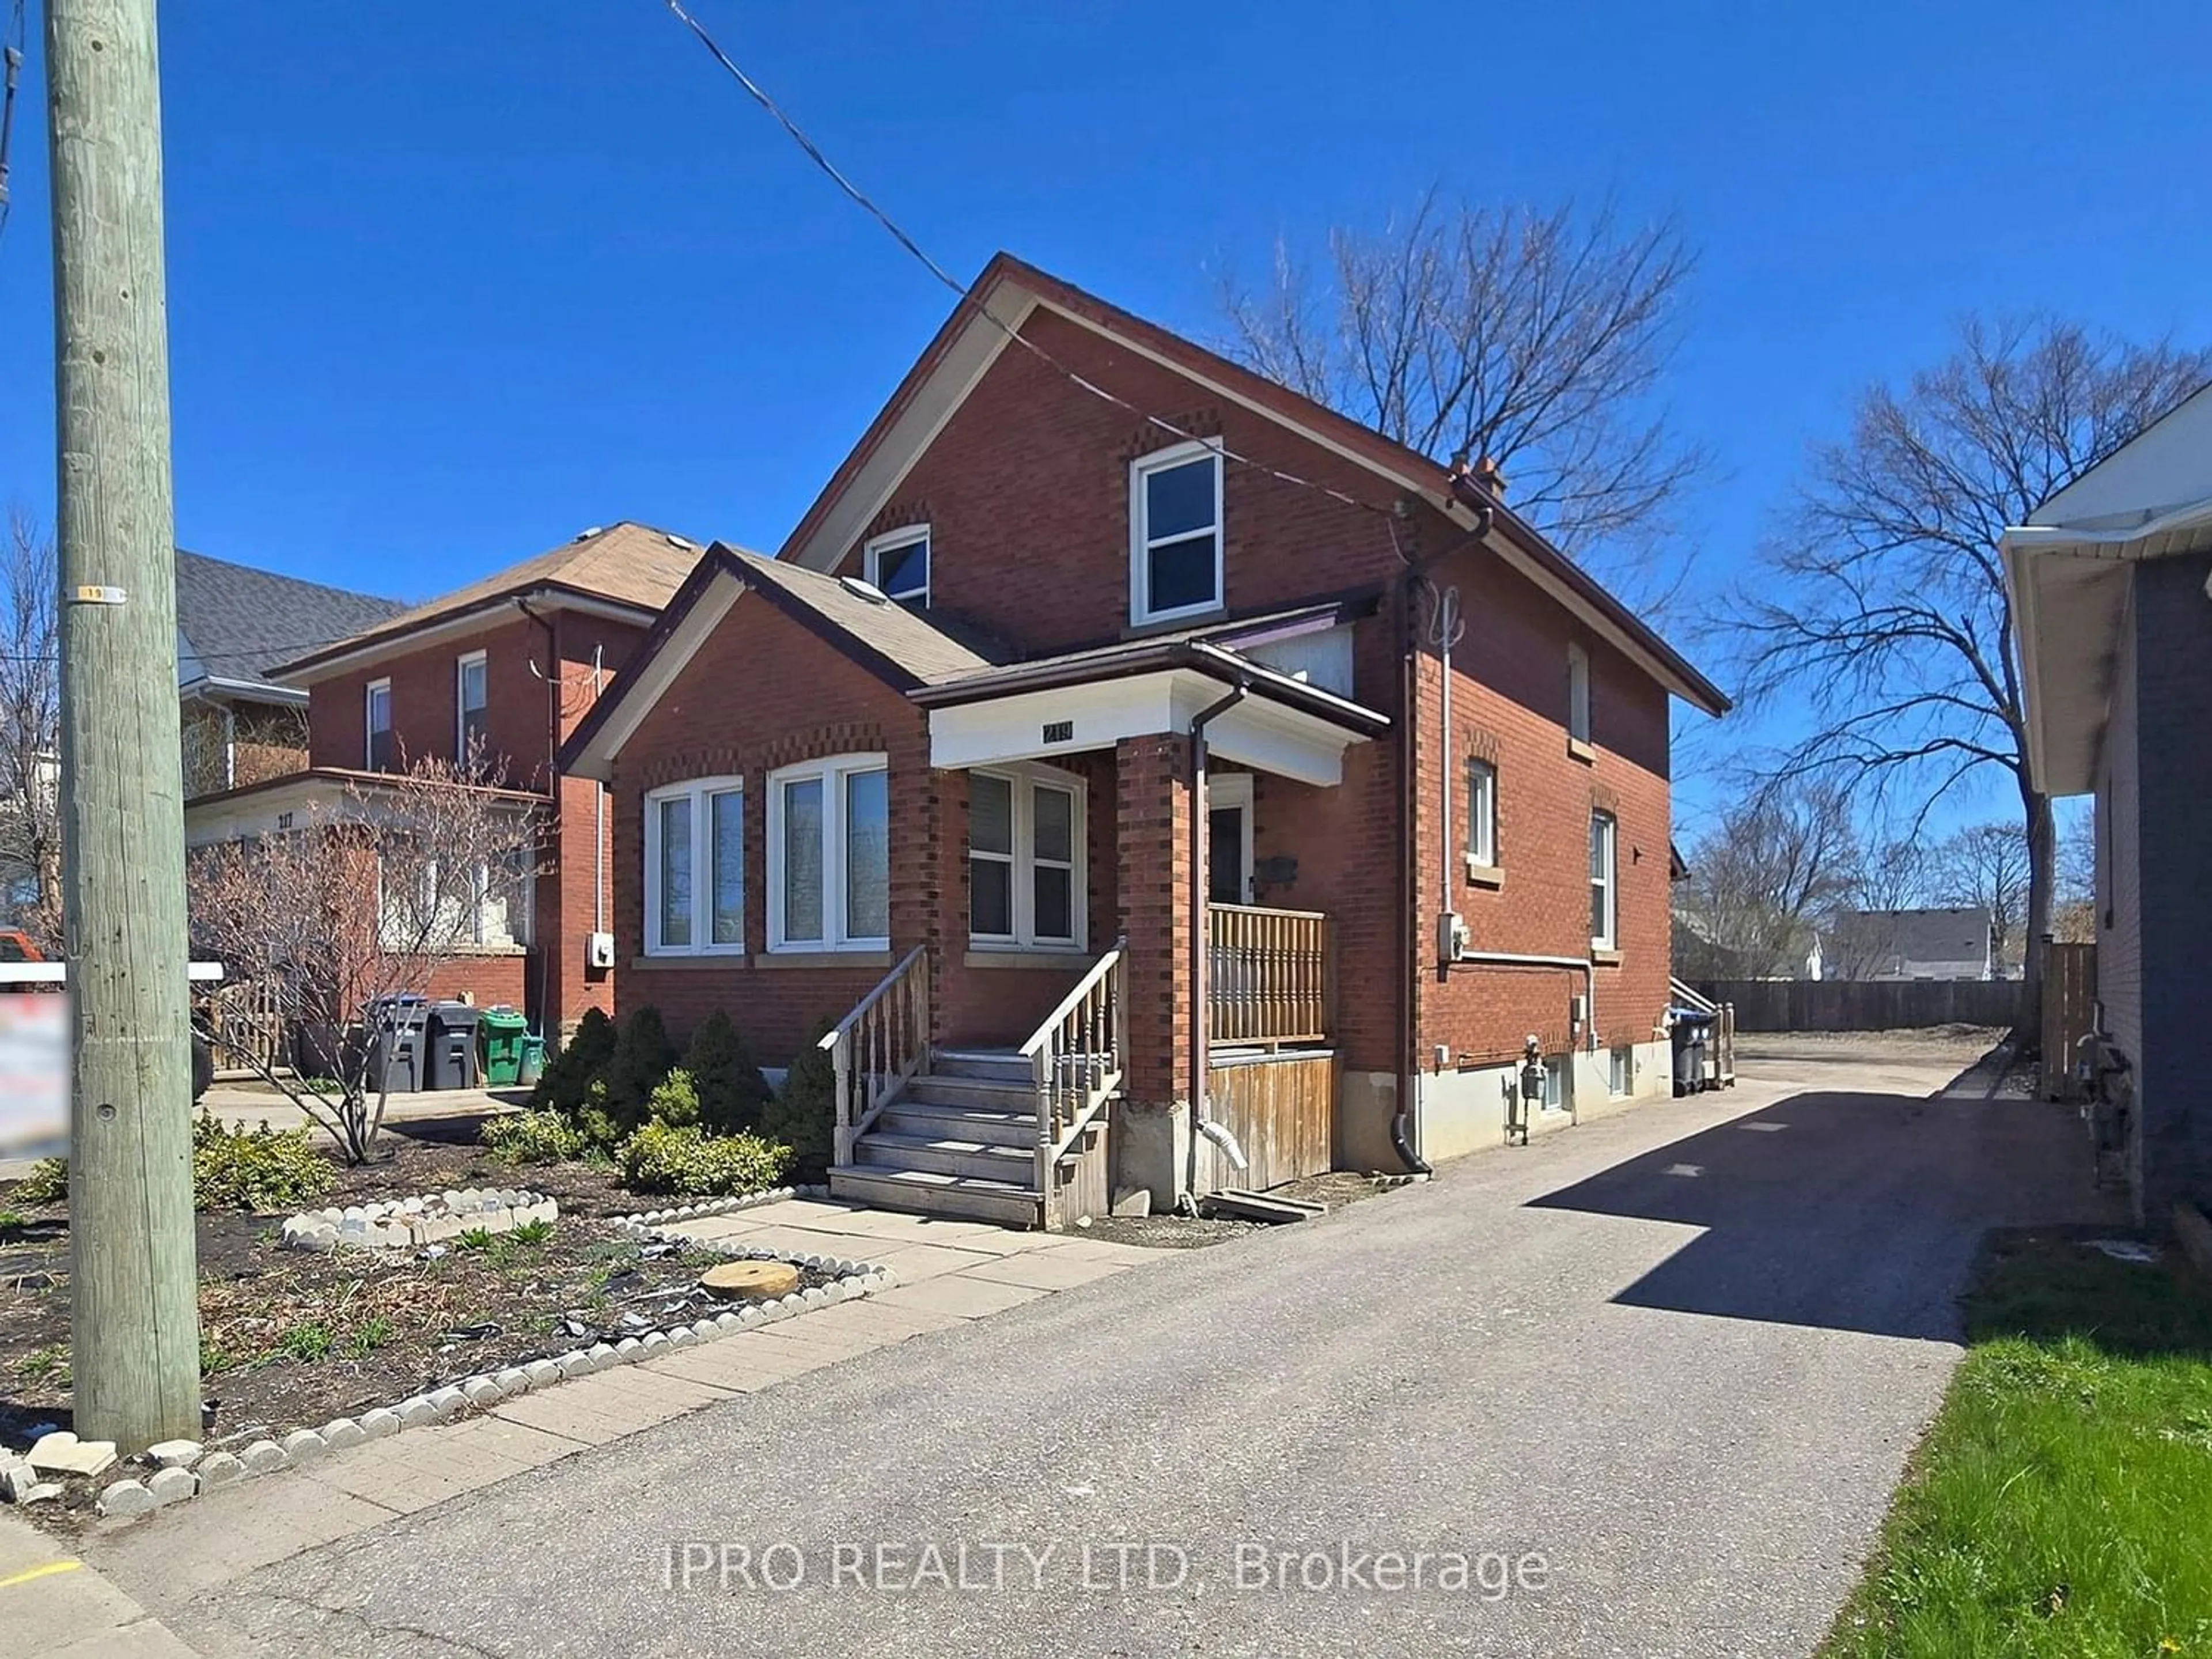 Home with brick exterior material for 219 Queen St, Brampton Ontario L6Y 1M6